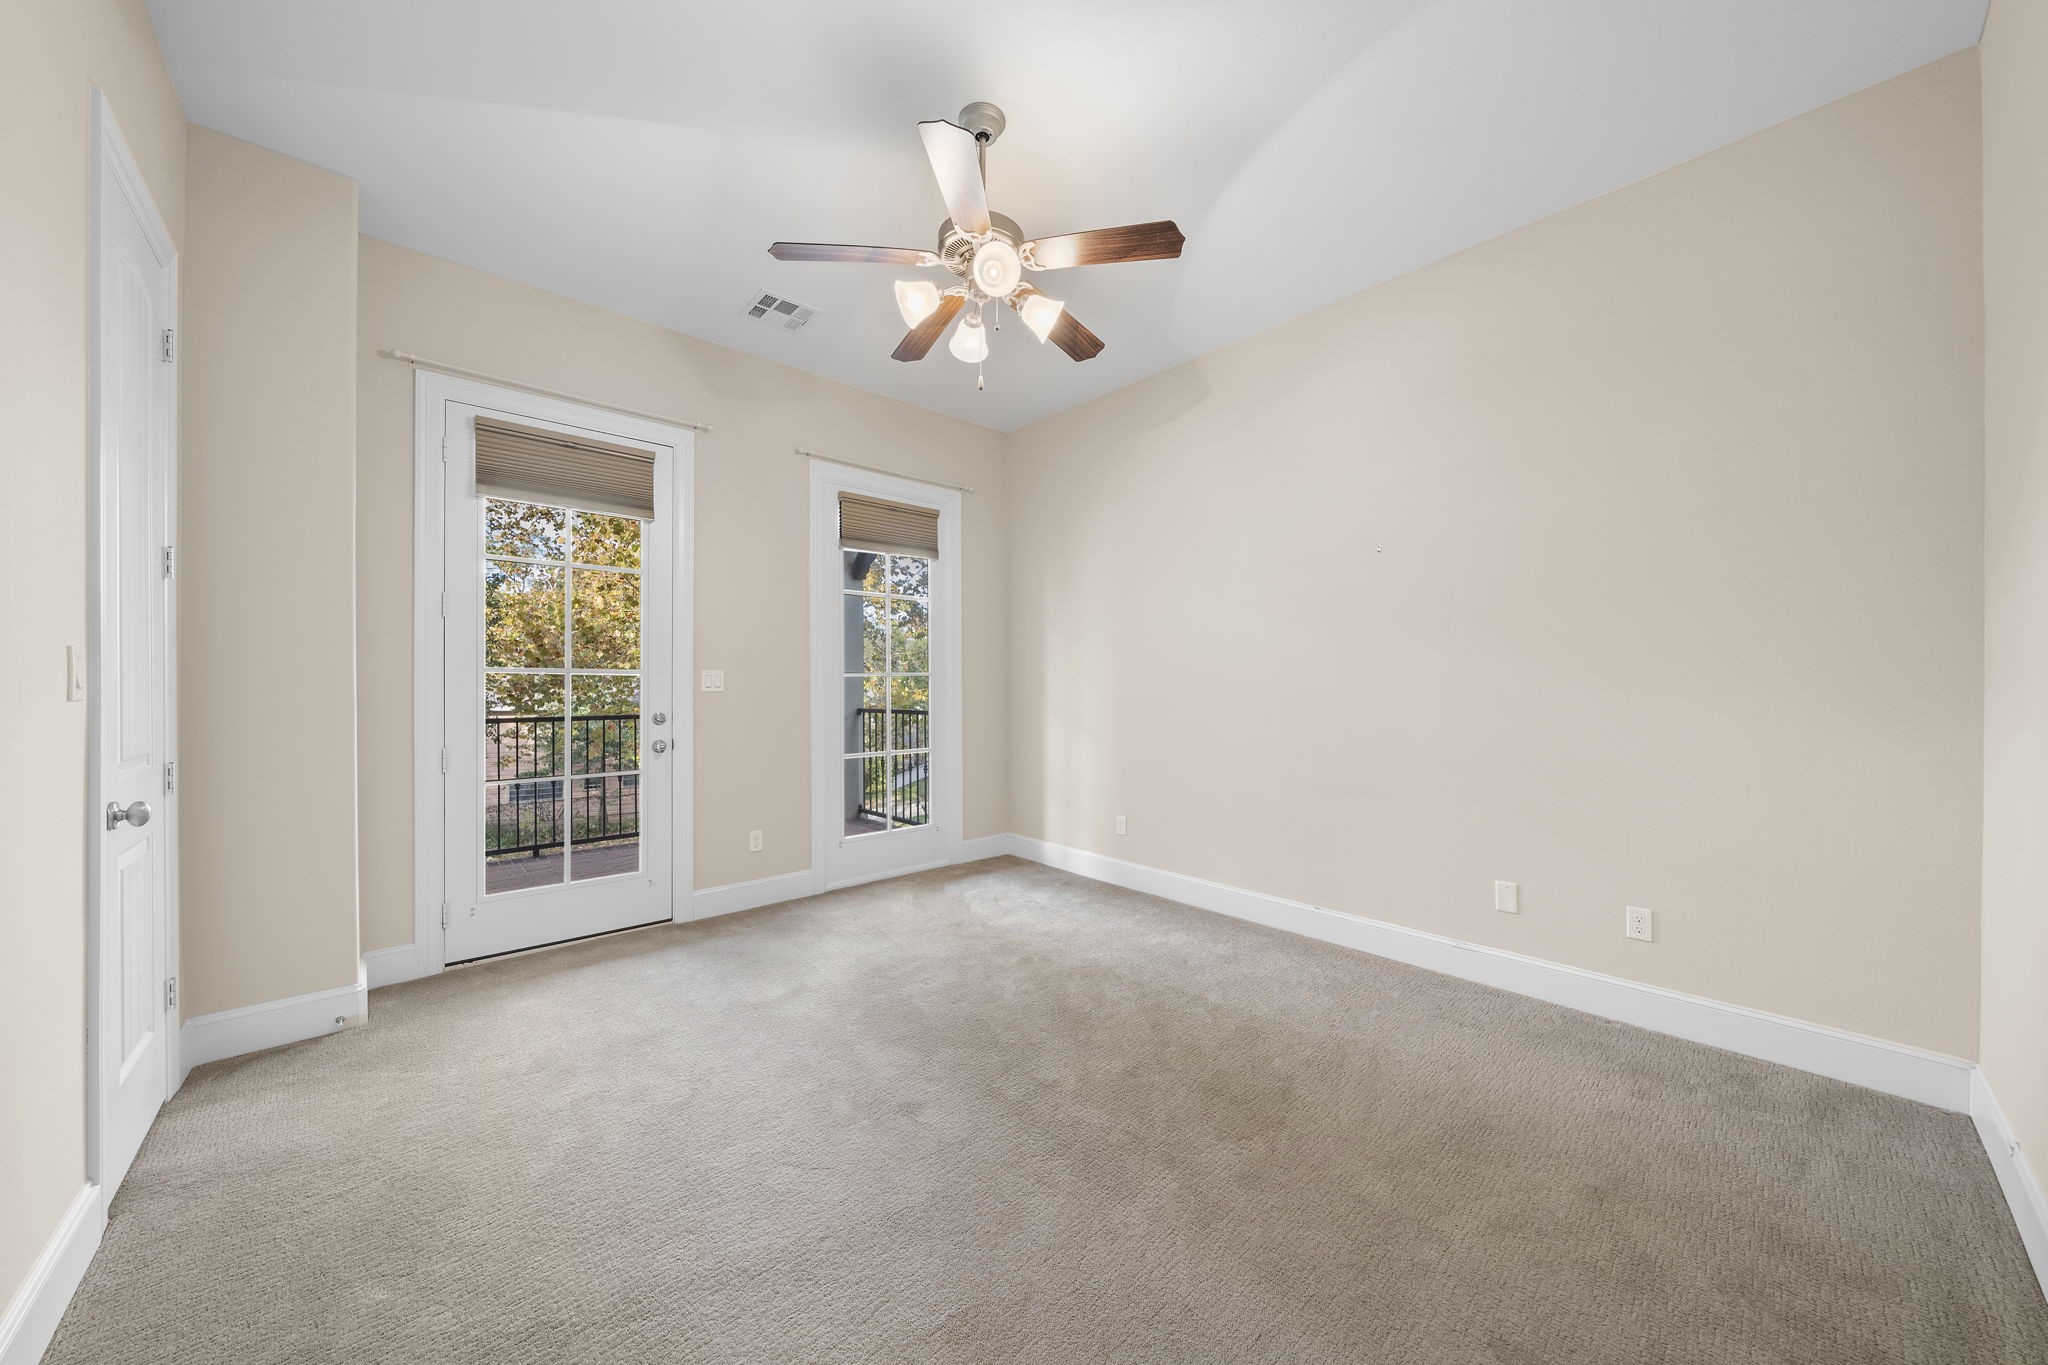 This spacious secondary bedroom is fitted with carpeted flooring, its own ensuite bath, a walk-in closet, and a covered balcony that frames delightful neighborhood views of the Nicholson Hike and Bike Trail.